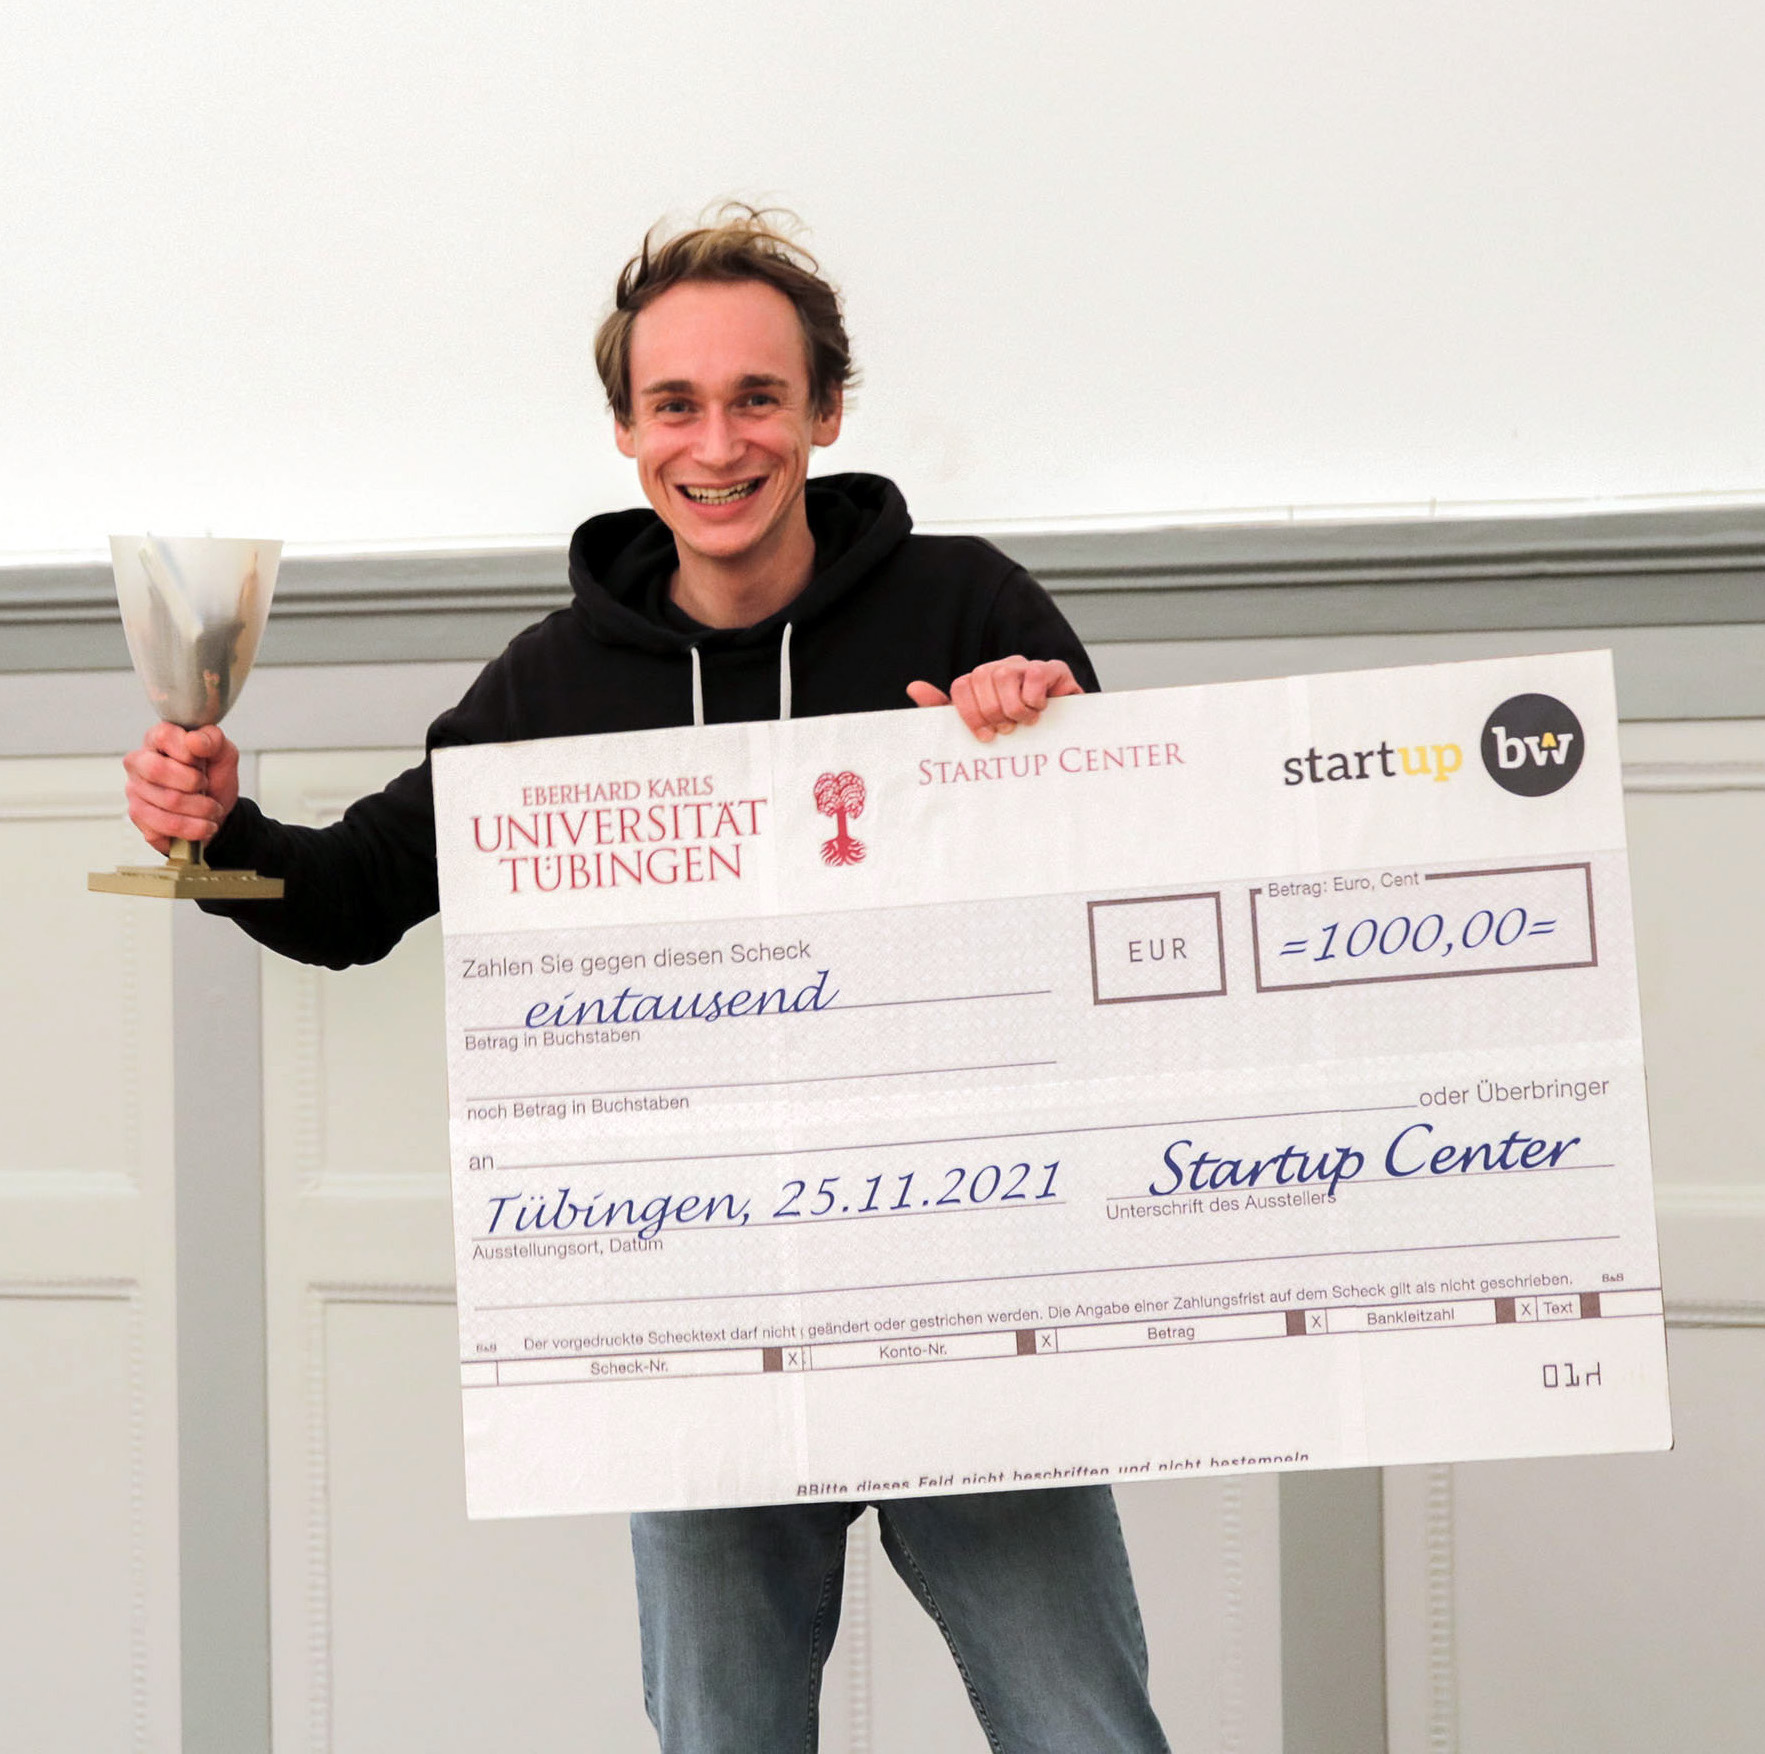 The environmental biotechnologist at the award ceremony with a cheque and a trophy in his hand.